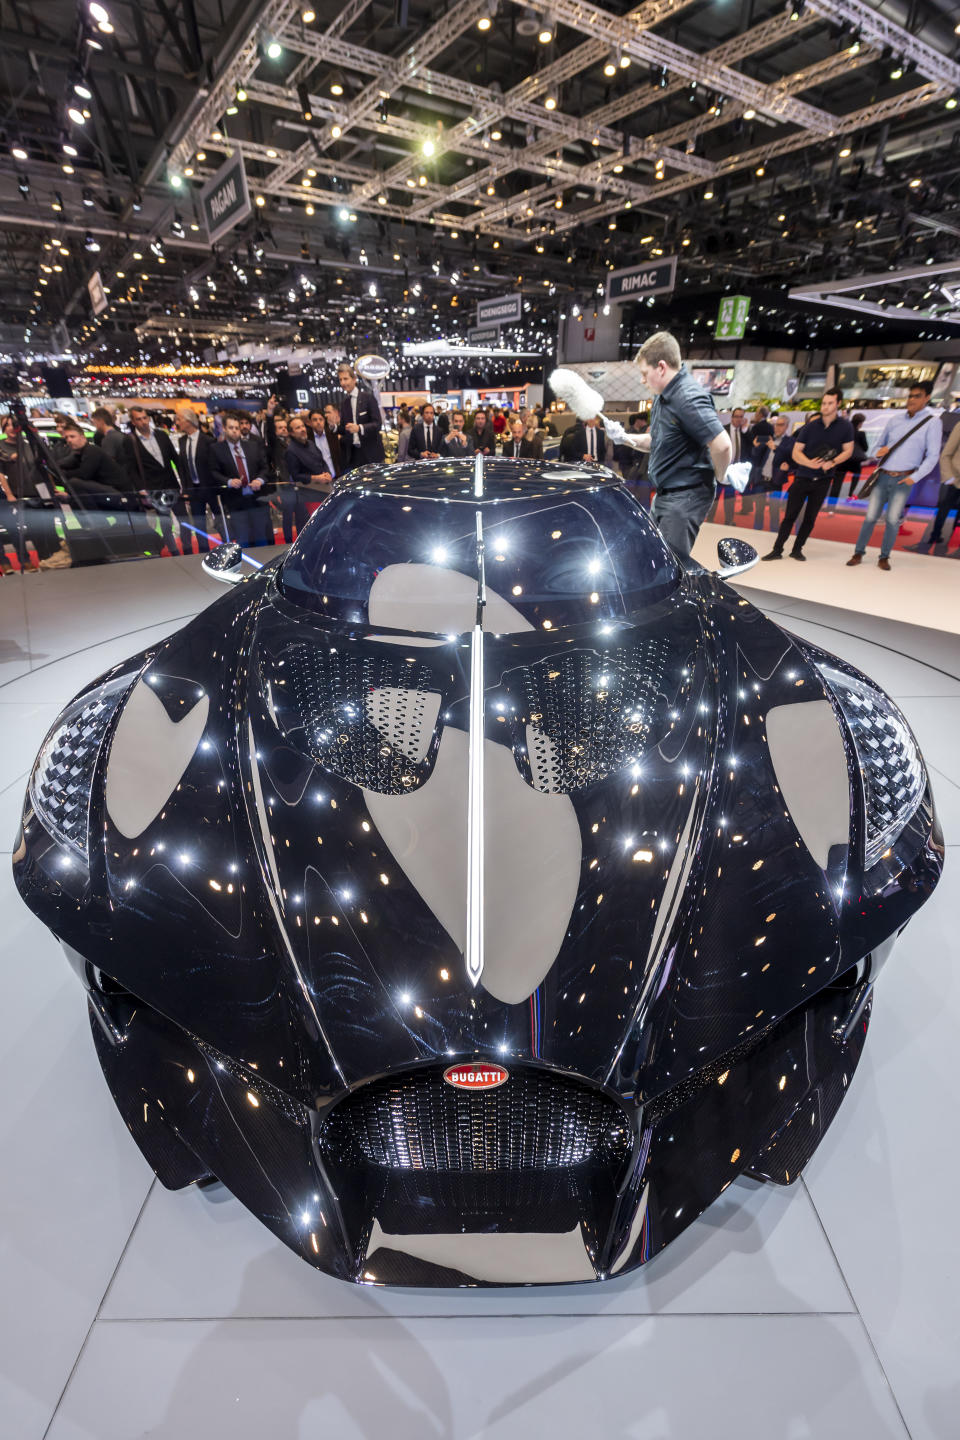 The New car Bugatti La voiture Noire is presented during the press day at the '89th Geneva International Motor Show' in Geneva, Switzerland, Tuesday, March 5, 2019. The 'Geneva International Motor Show' takes place in Switzerland from March 7 until March 17, 2019. Automakers are rolling out new electric and hybrid models at the show as they get ready to meet tougher emissions requirements in Europe - while not forgetting the profitable and popular SUVs and SUV-like crossovers. (Martial Trezzini/Keystone via AP)